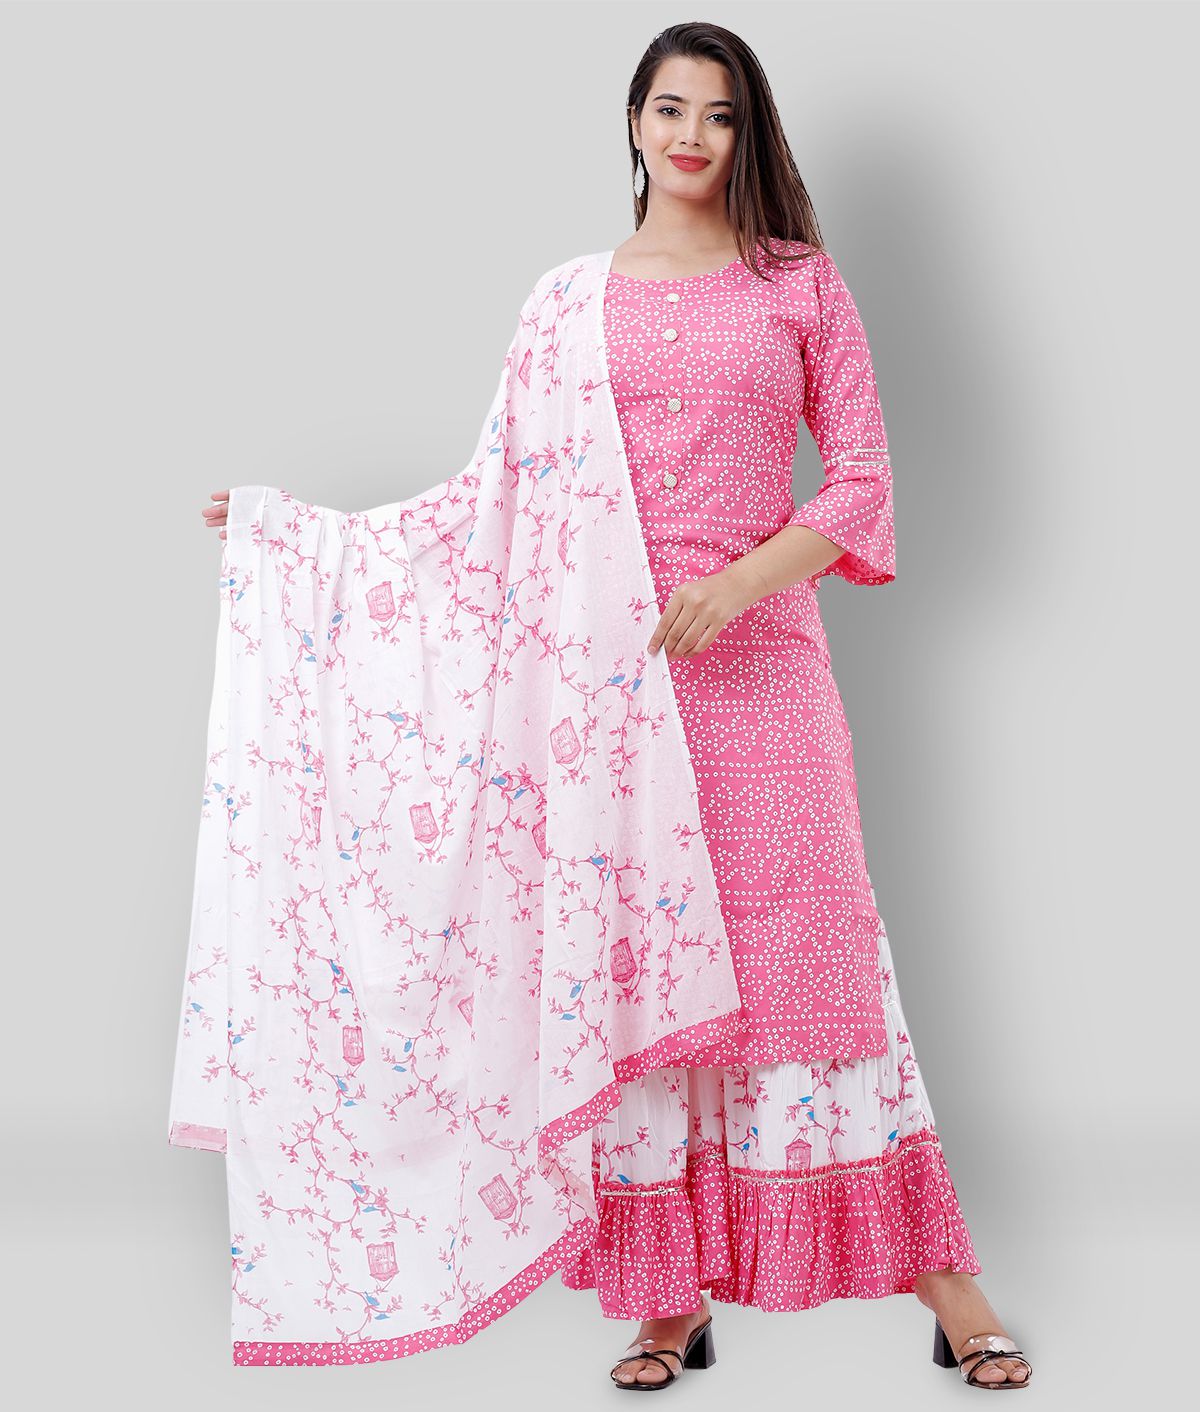     			Lee Moda - Pink Straight Rayon Women's Stitched Salwar Suit ( Pack of 1 )